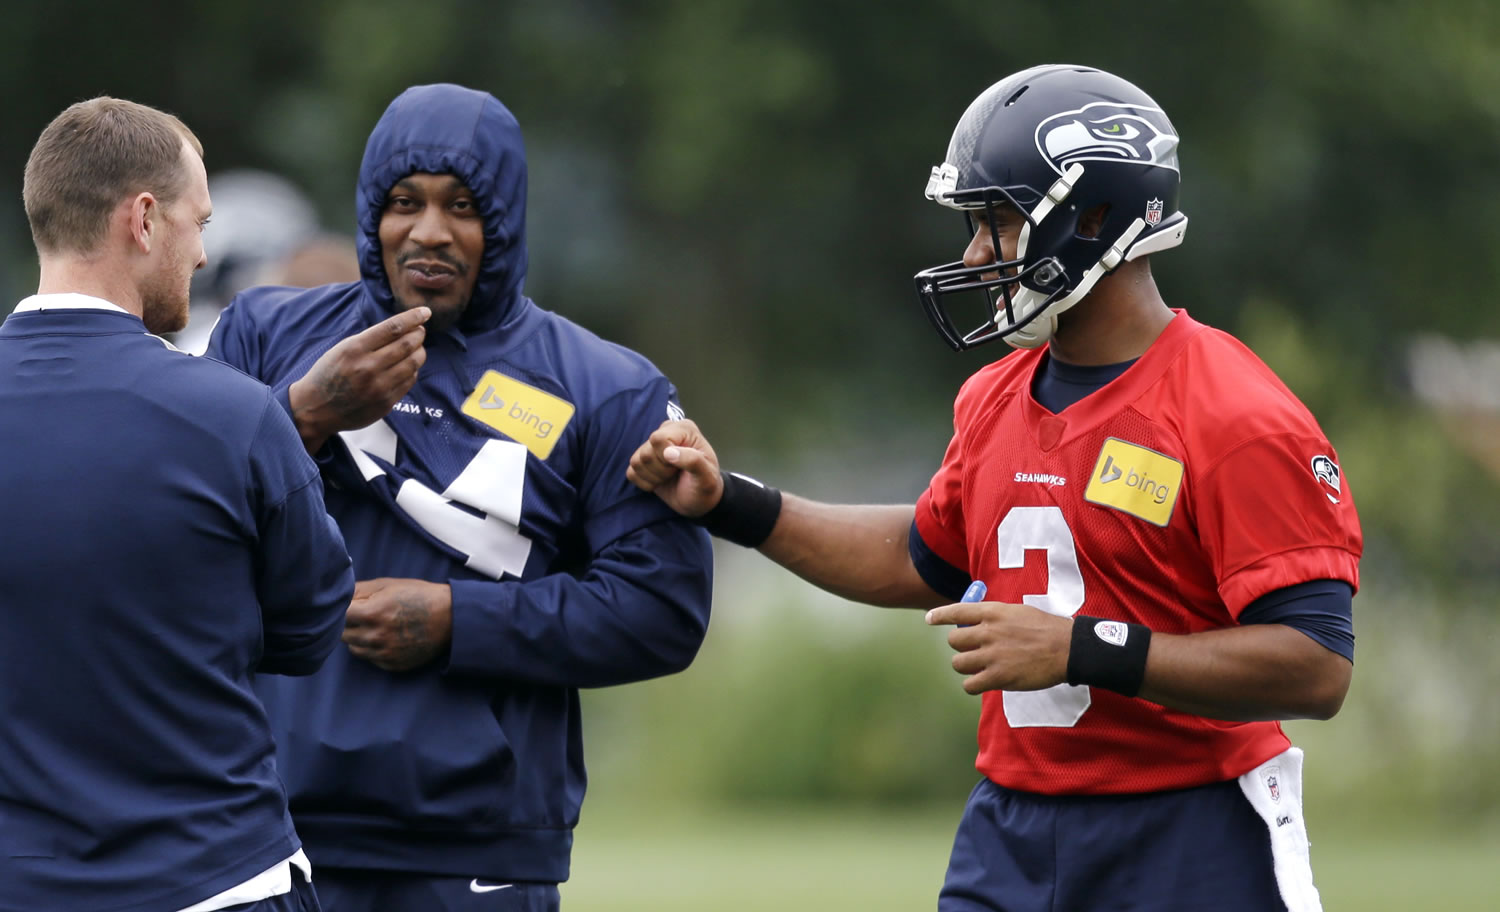 Seattle Seahawks quarterback Russell Wilson, right, greets running back Marshawn Lynch at a football minicamp practice Tuesday in Renton.